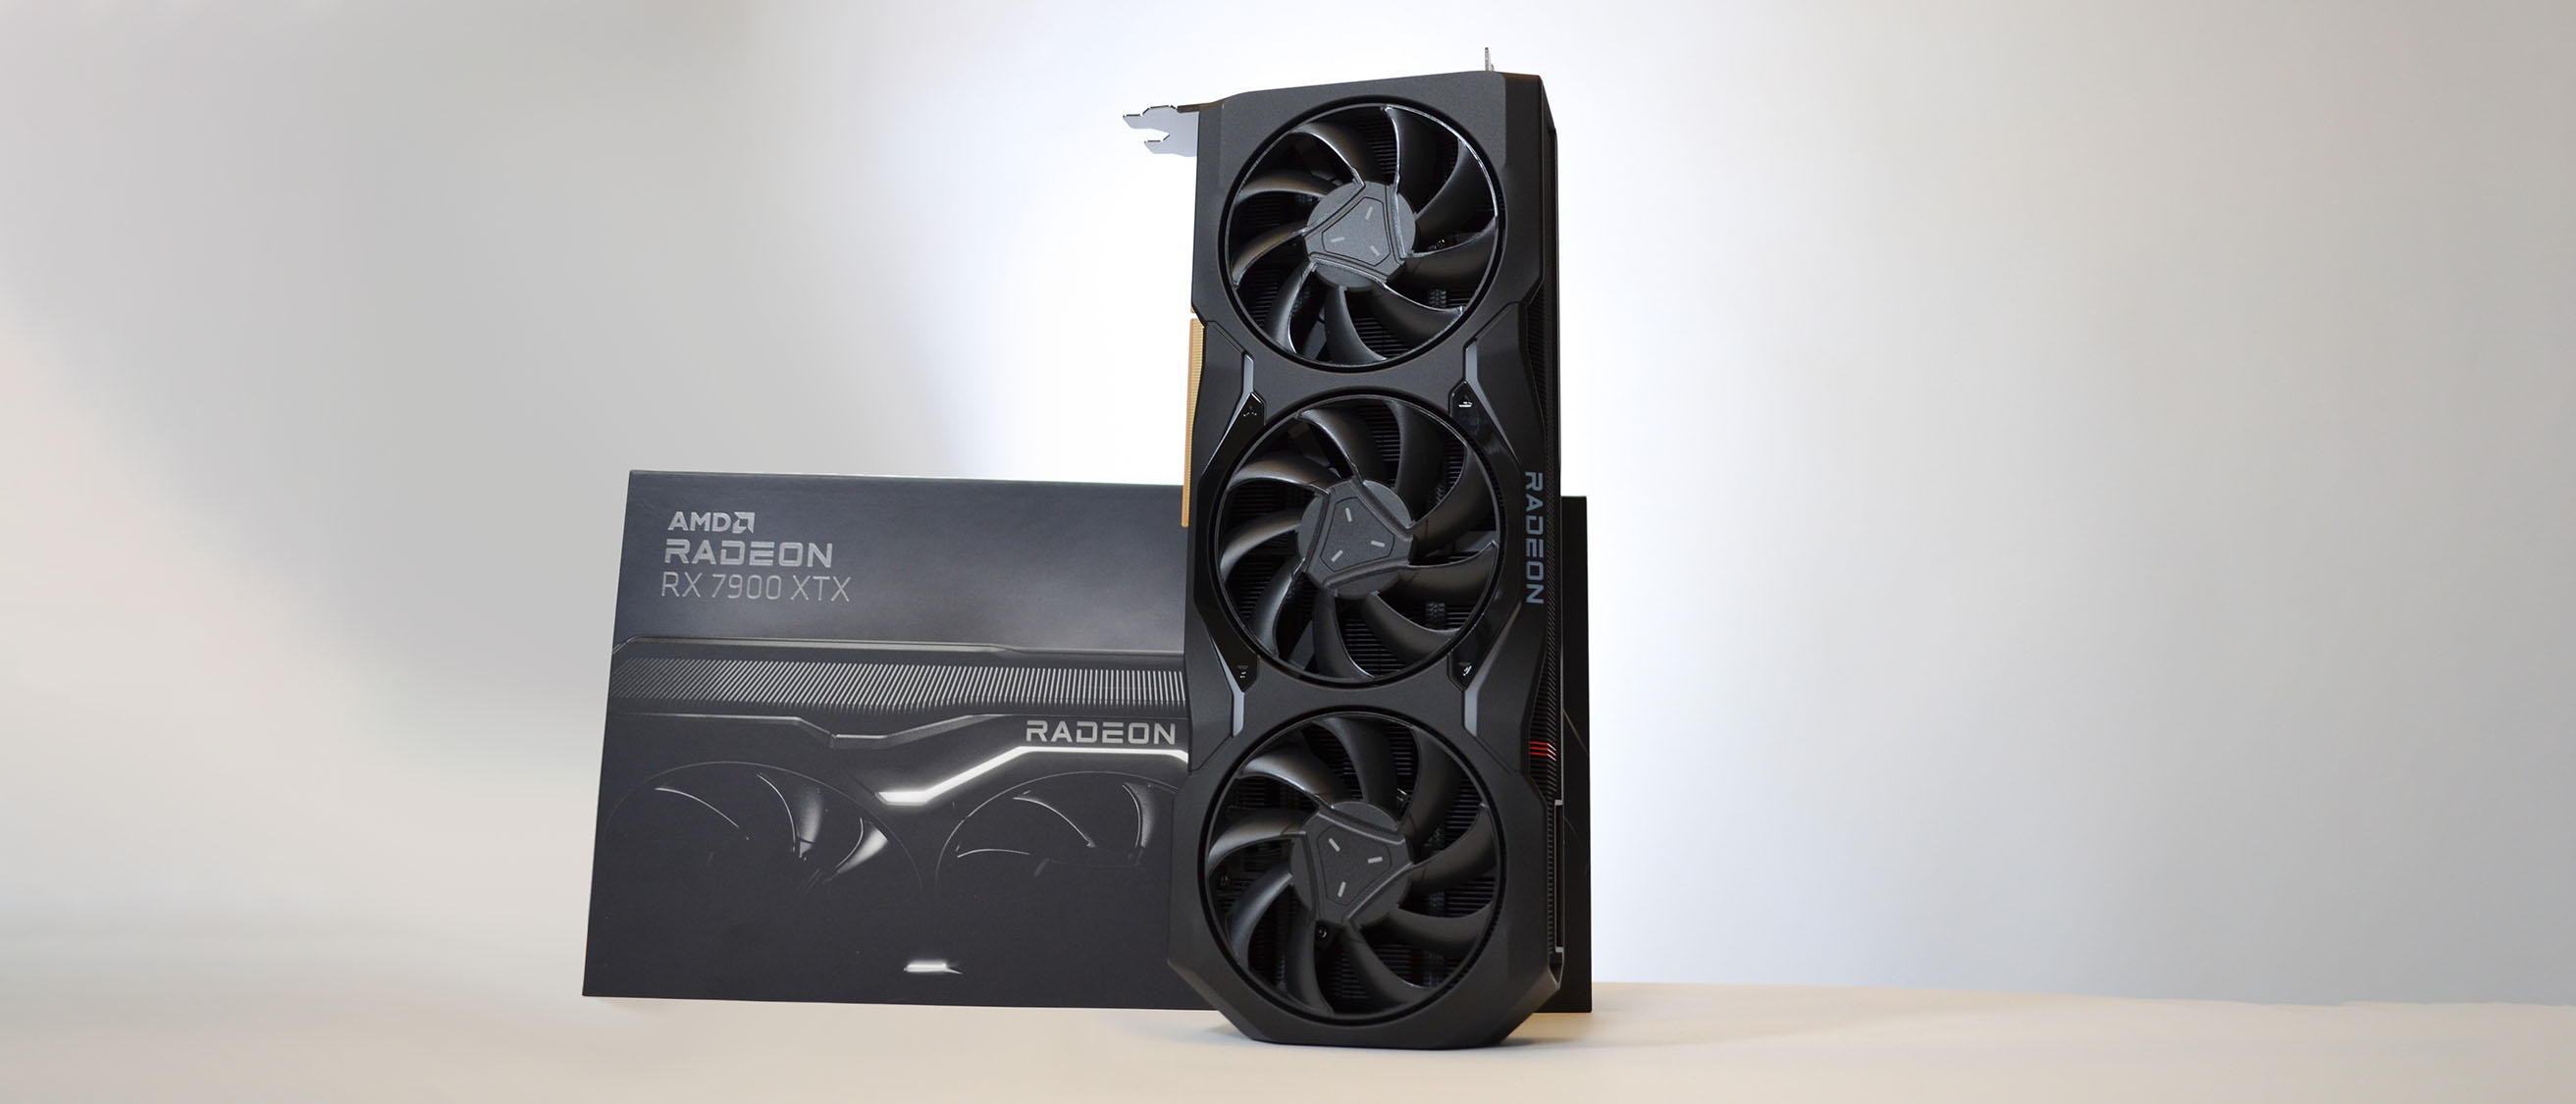 AMD Radeon RX 7900 XT Review: The Entry-Level Of Enthusiast